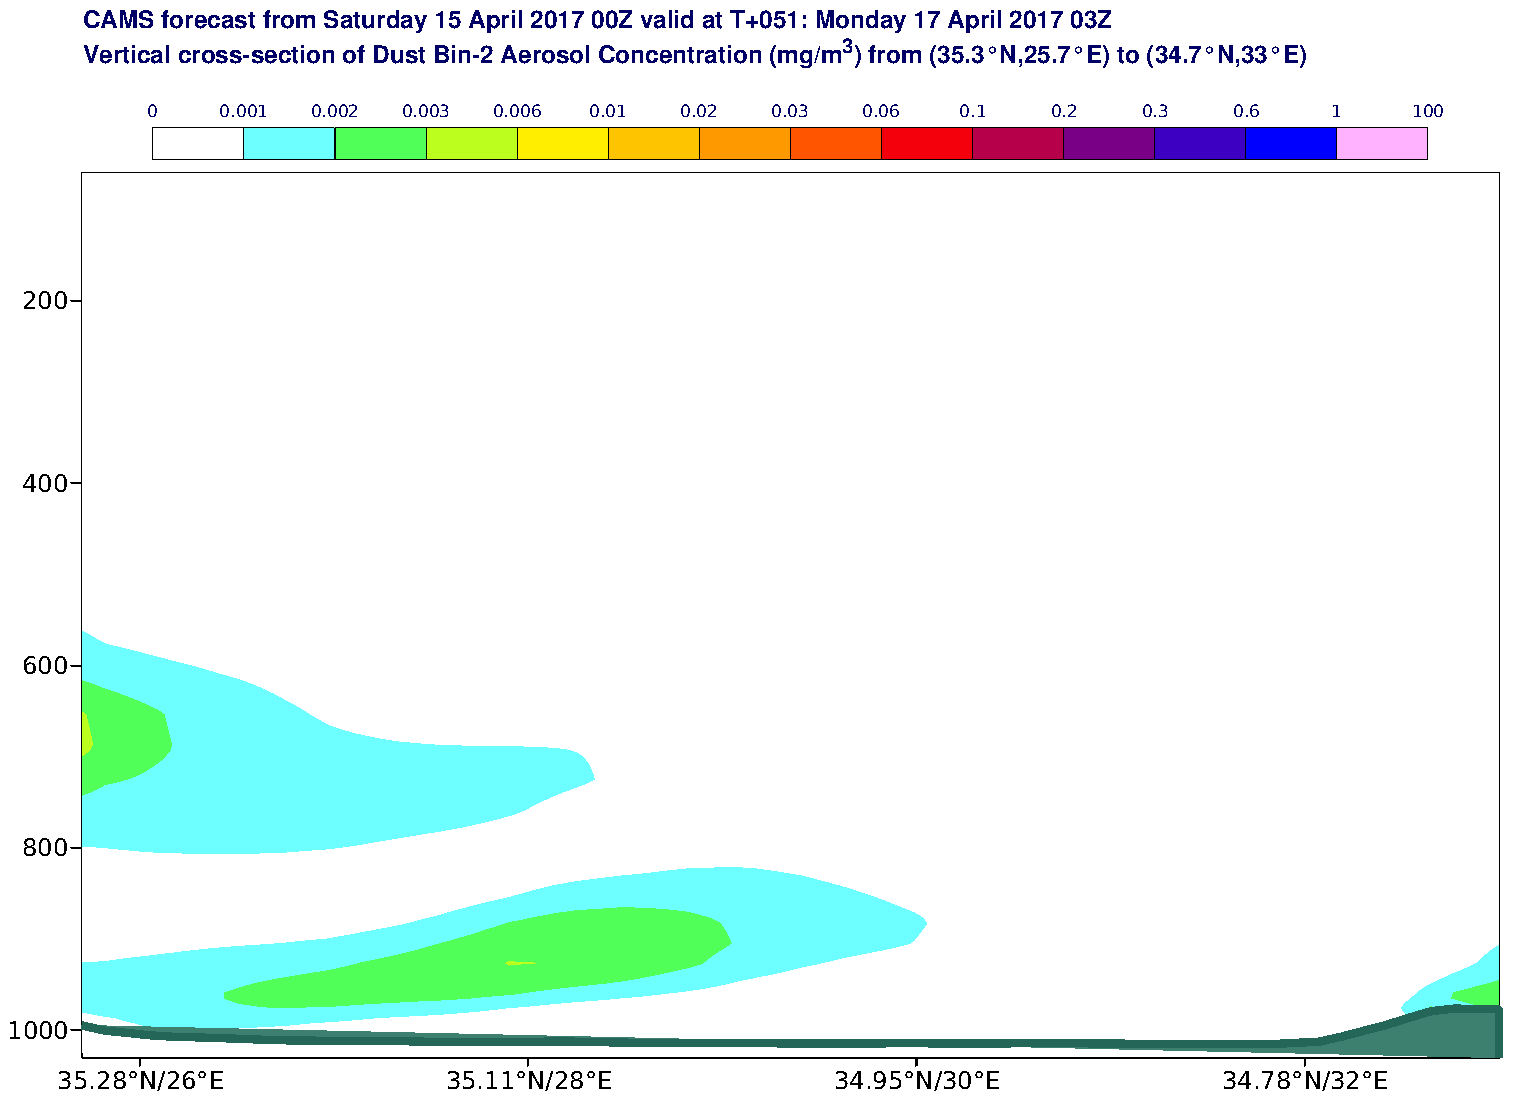 Vertical cross-section of Dust Bin-2 Aerosol Concentration (mg/m3) valid at T51 - 2017-04-17 03:00